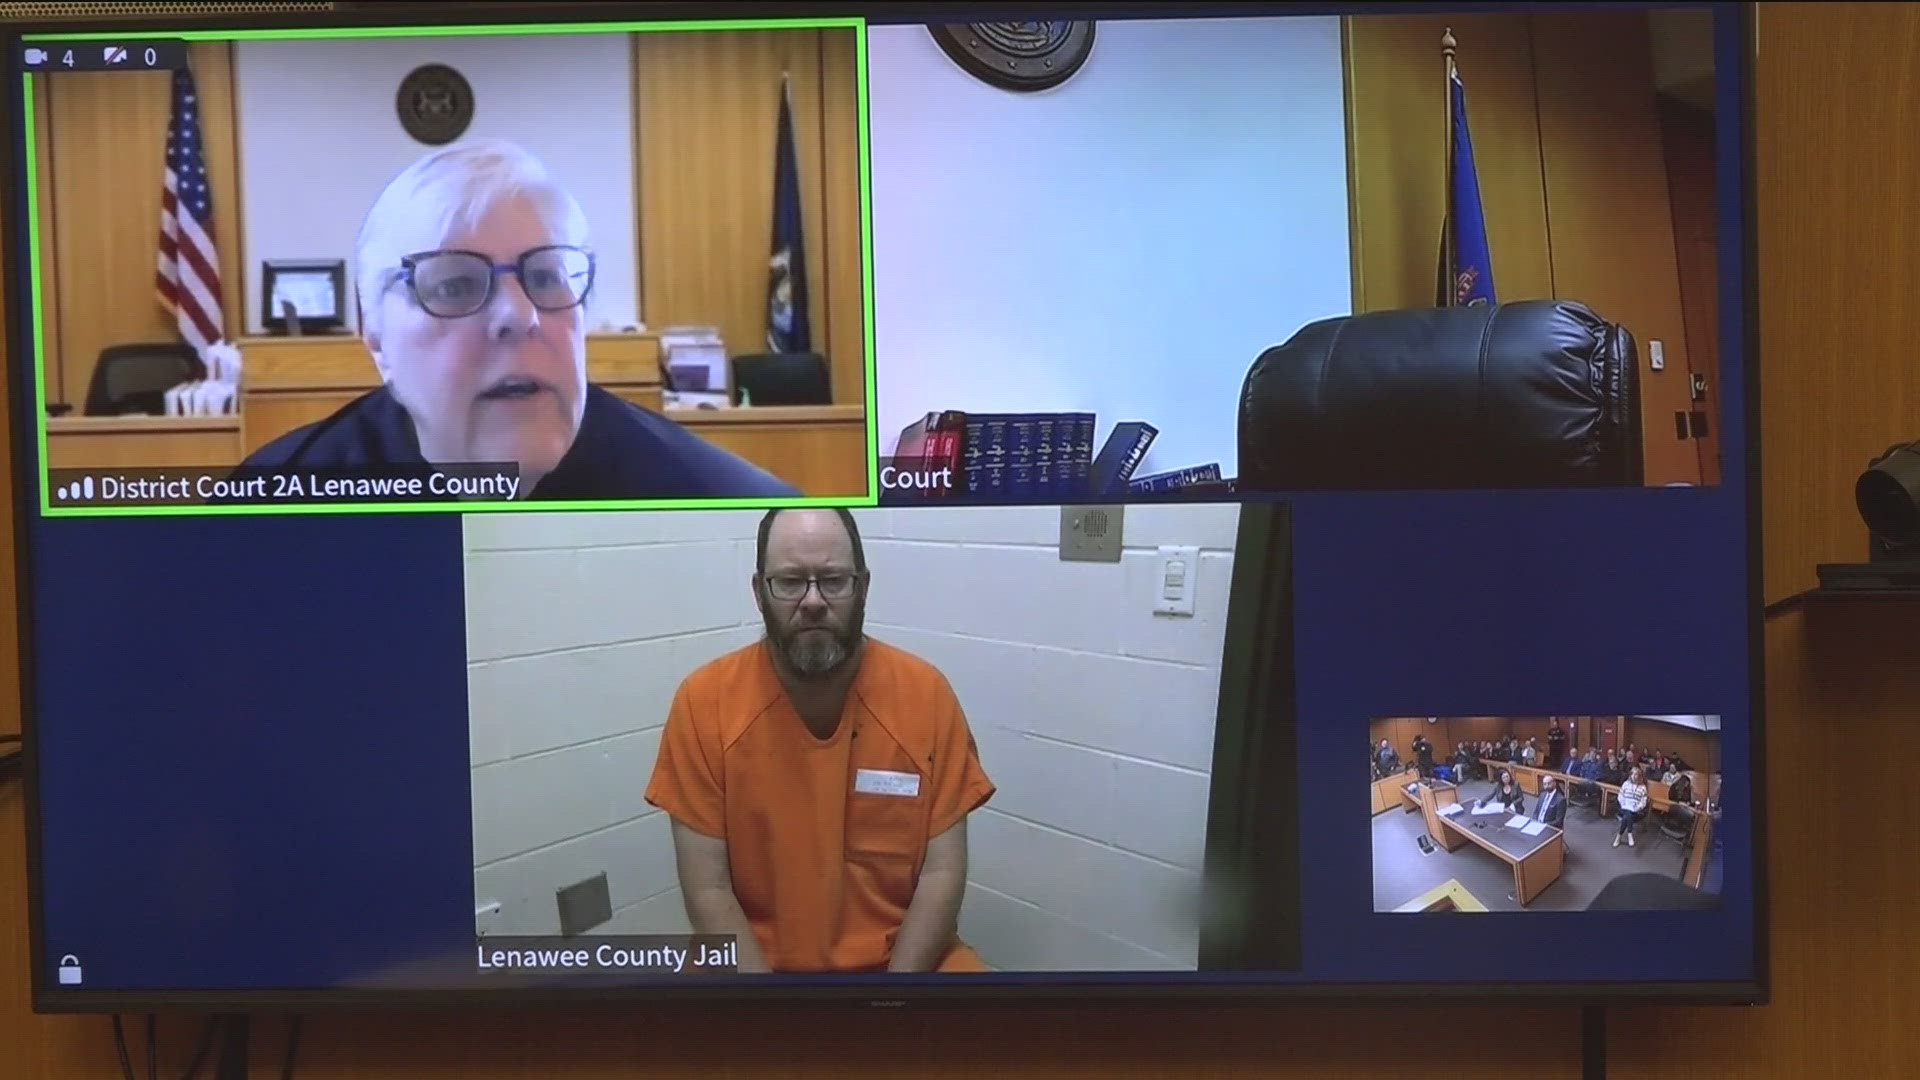 Dale Warner was arraigned in a Lenawee County courtroom Wednesday, charged with murder after his wife Dee Ann Warner disappeared without a trace over two years ago.